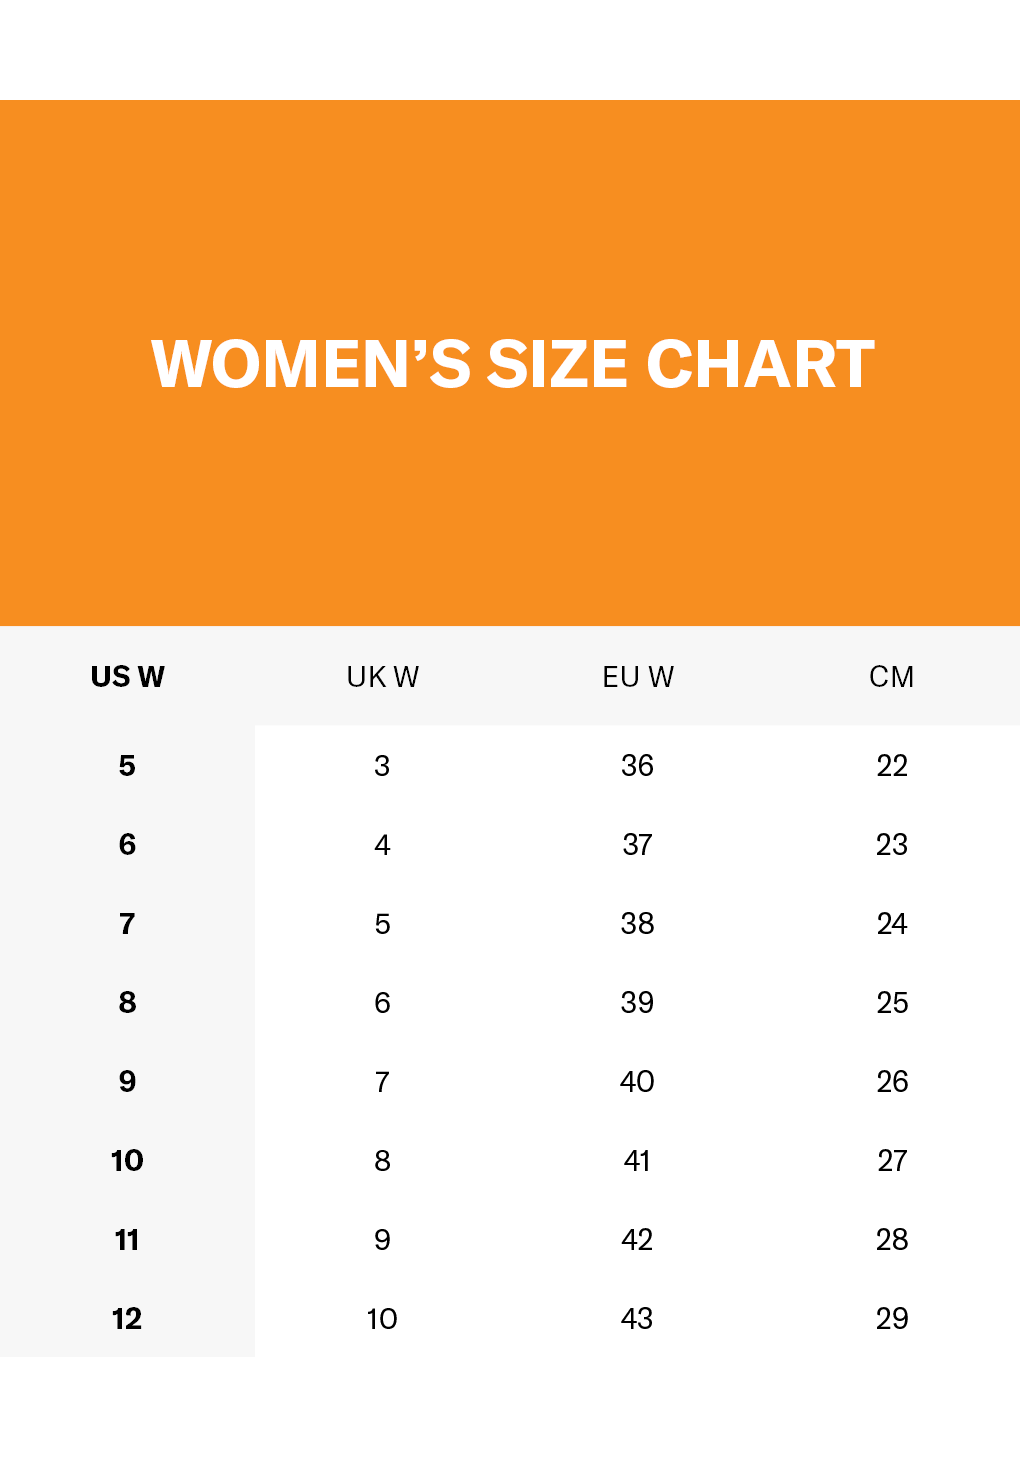 How To Measure Shoe Size – A Perfect Guide With Sizing Chart